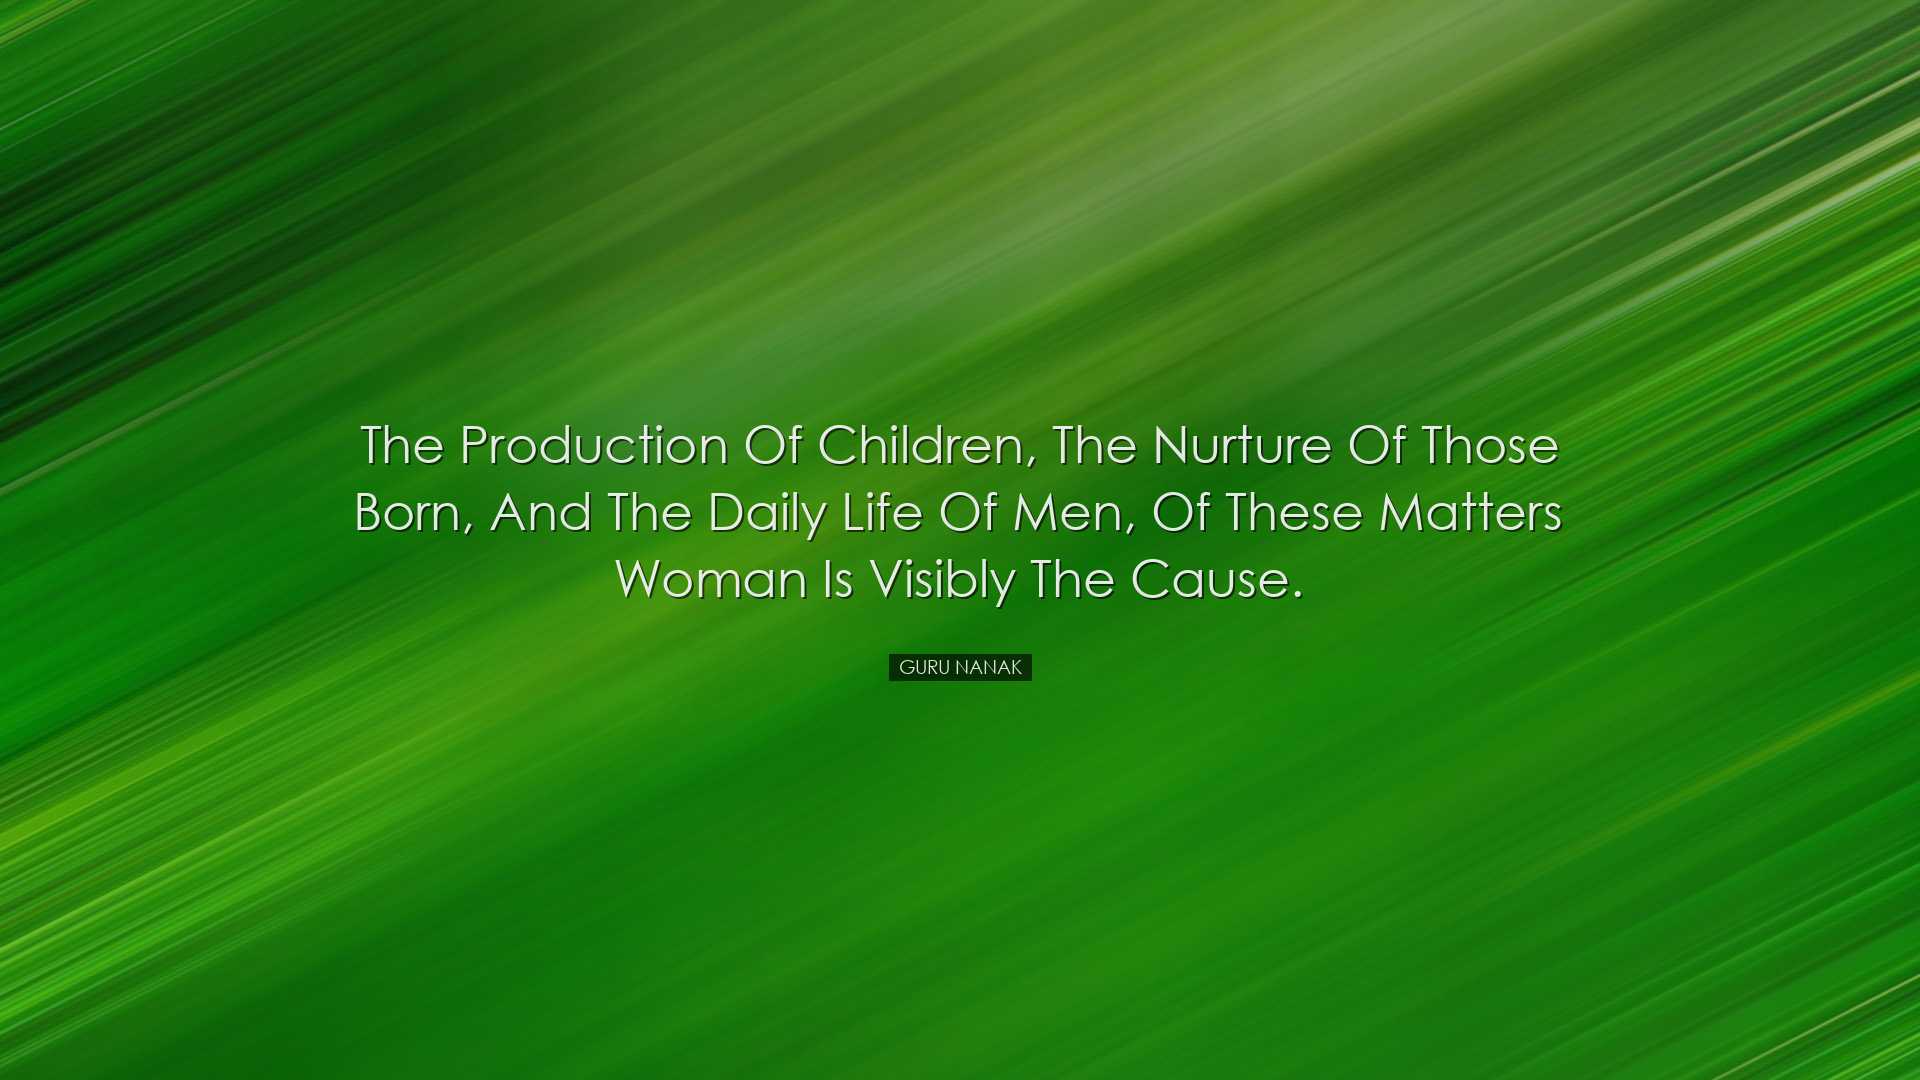 The production of children, the nurture of those born, and the dai